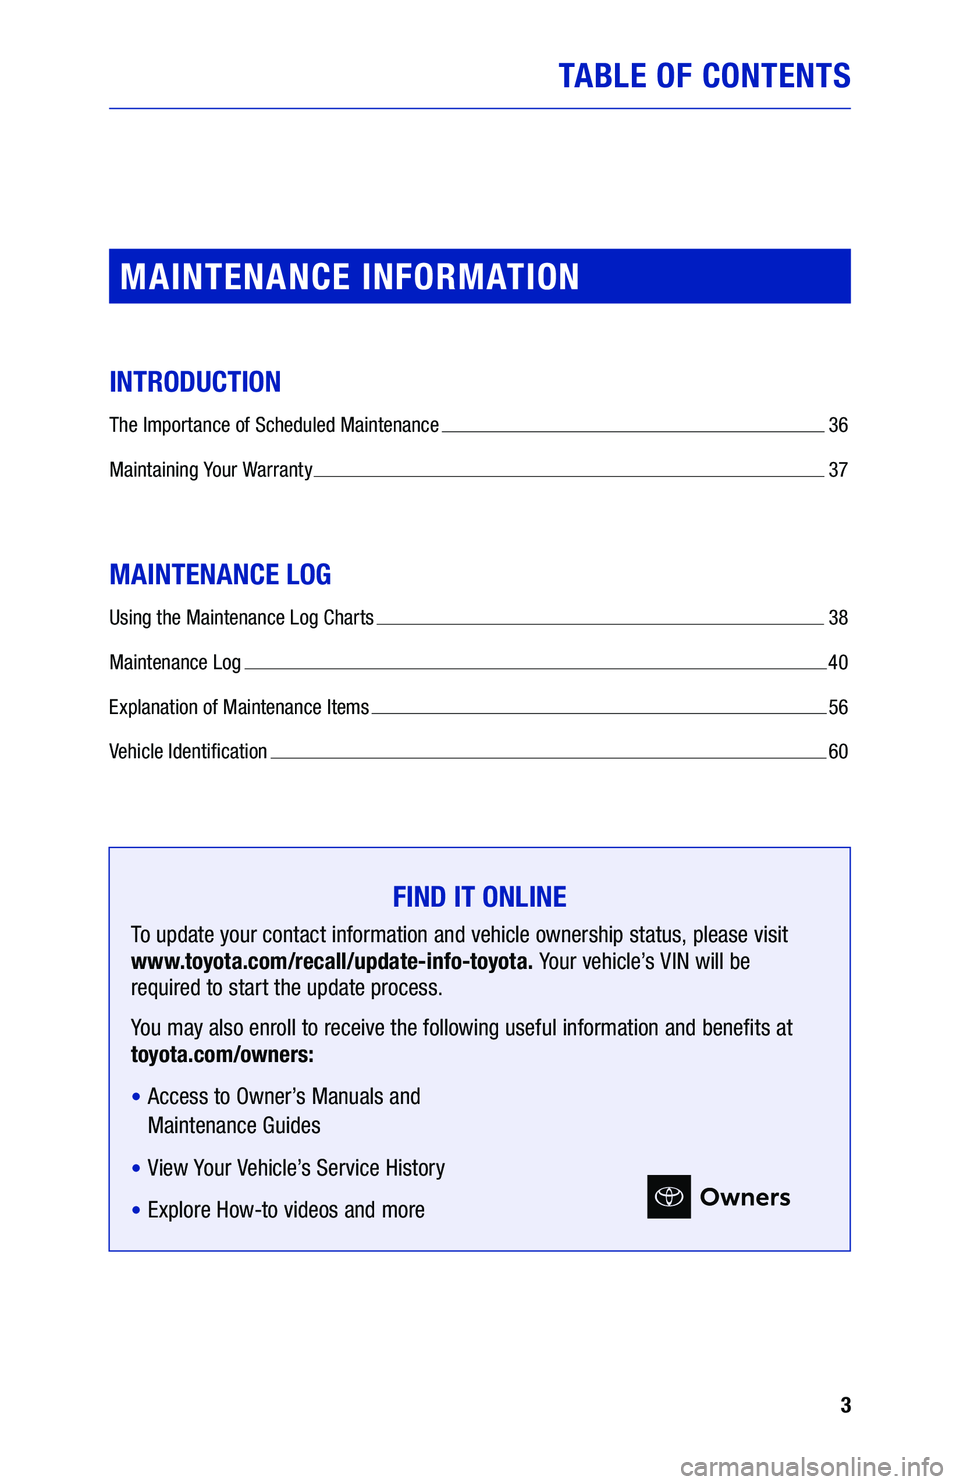 TOYOTA CAMRY HYBRID 2021  Warranties & Maintenance Guides (in English) TABLE OF CONTENTS
 
FIND IT ONLINE
64436_19-TCS-14194_TXT.indd   364436_19-TCS-14194_TXT.indd   38/20/20   2:56 PM8/20/20   2:56 PM 